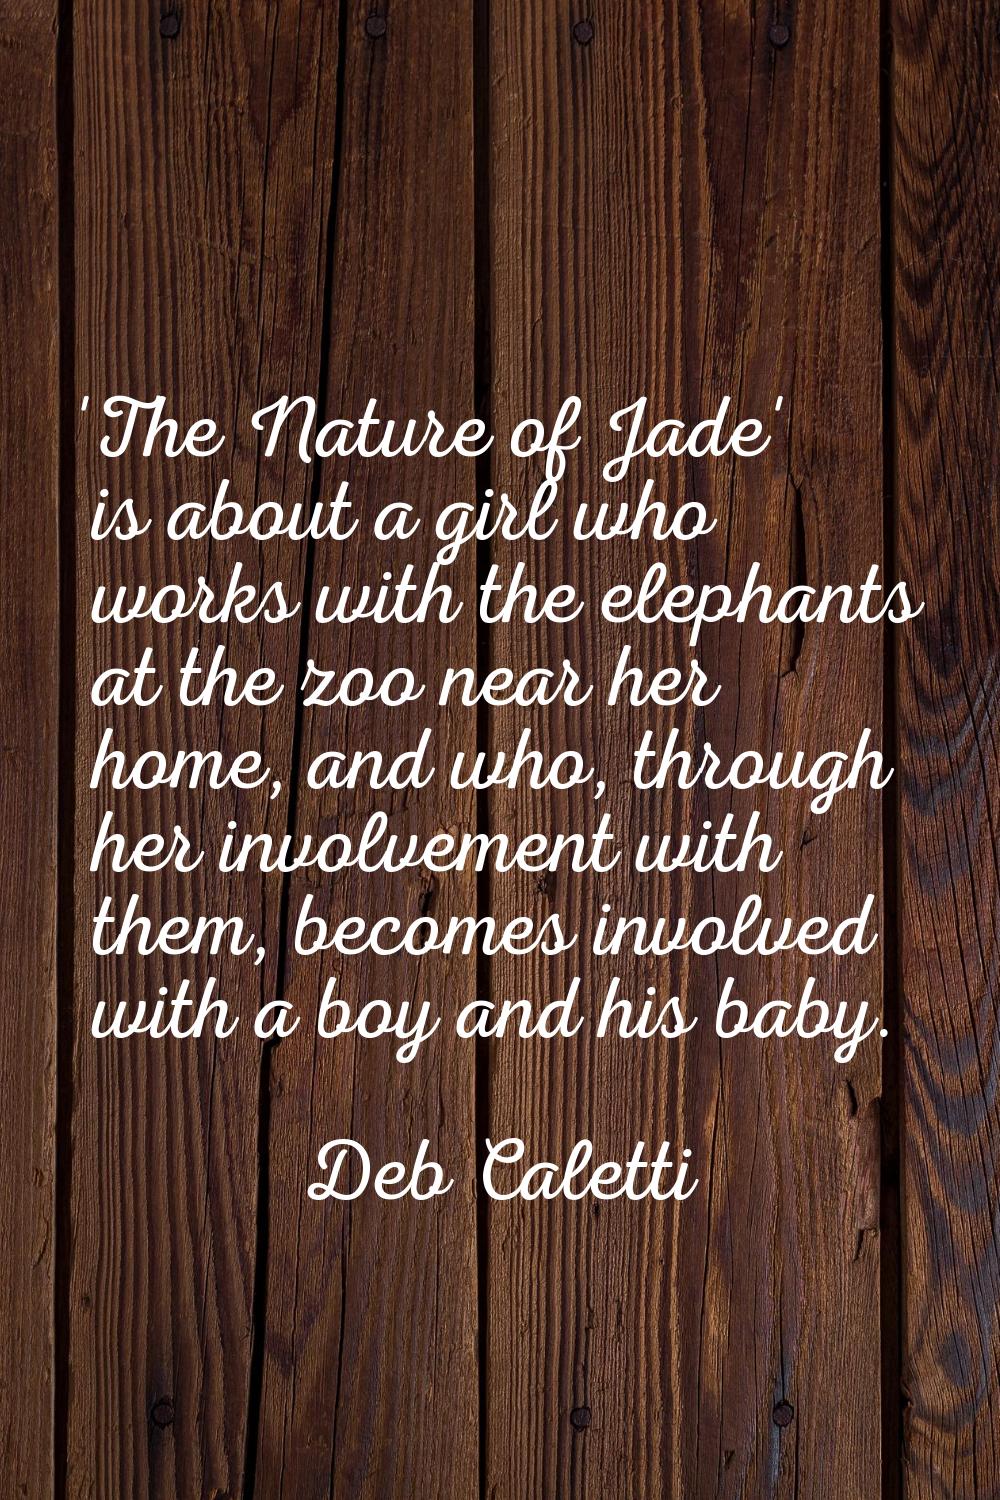 'The Nature of Jade' is about a girl who works with the elephants at the zoo near her home, and who